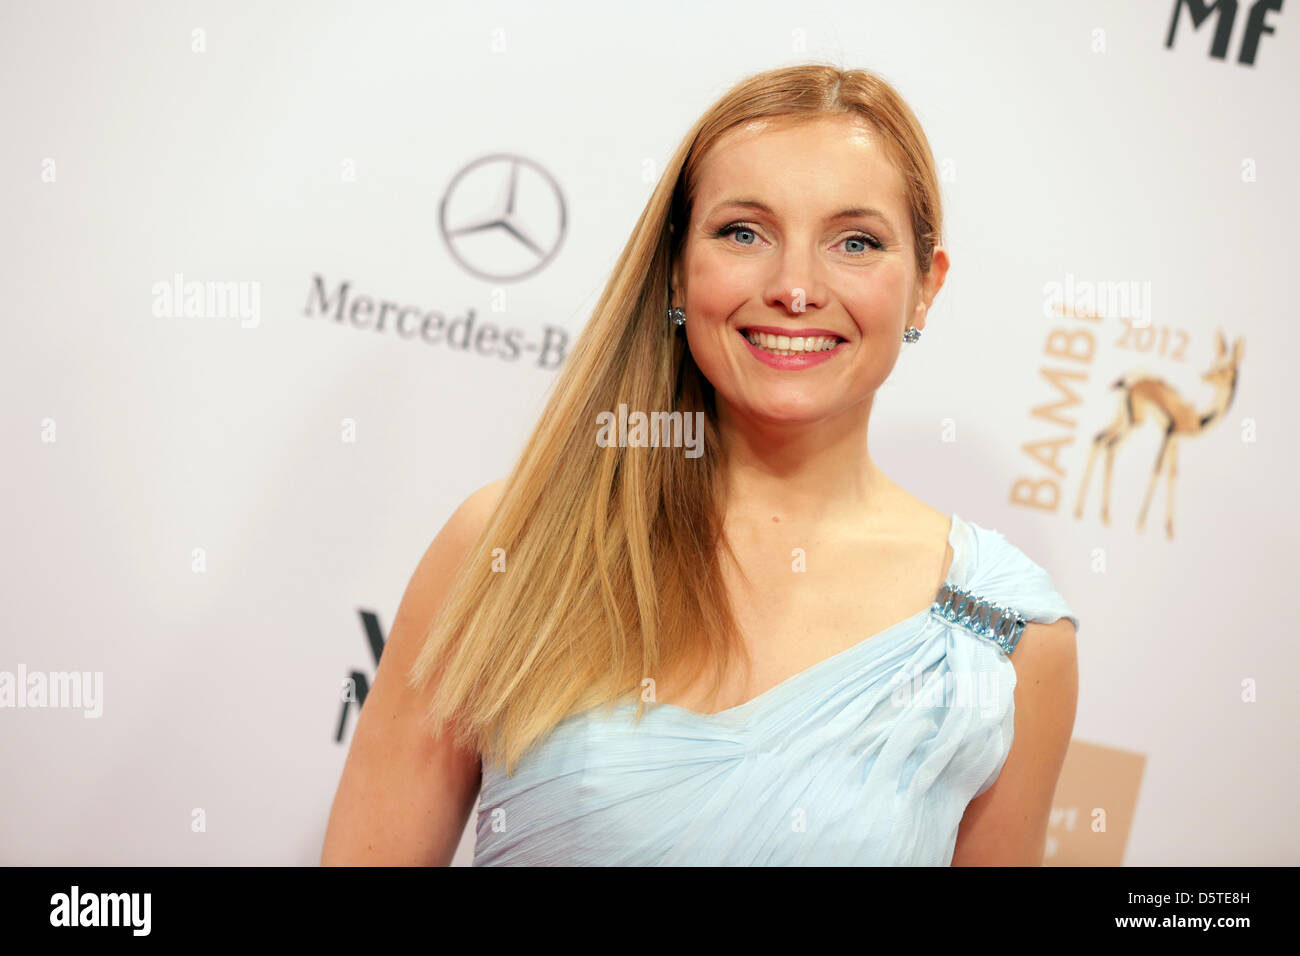 German actress Nadja Uhl arrives for the Bambi award ceremony 2012 in Duesseldorf, Germany, 22 November 2012. The Bambis are the main German media awards and are presented for the 64th time. Photo: Jörg Carstensen/dpa  +++(c) dpa - Bildfunk+++ Stock Photo